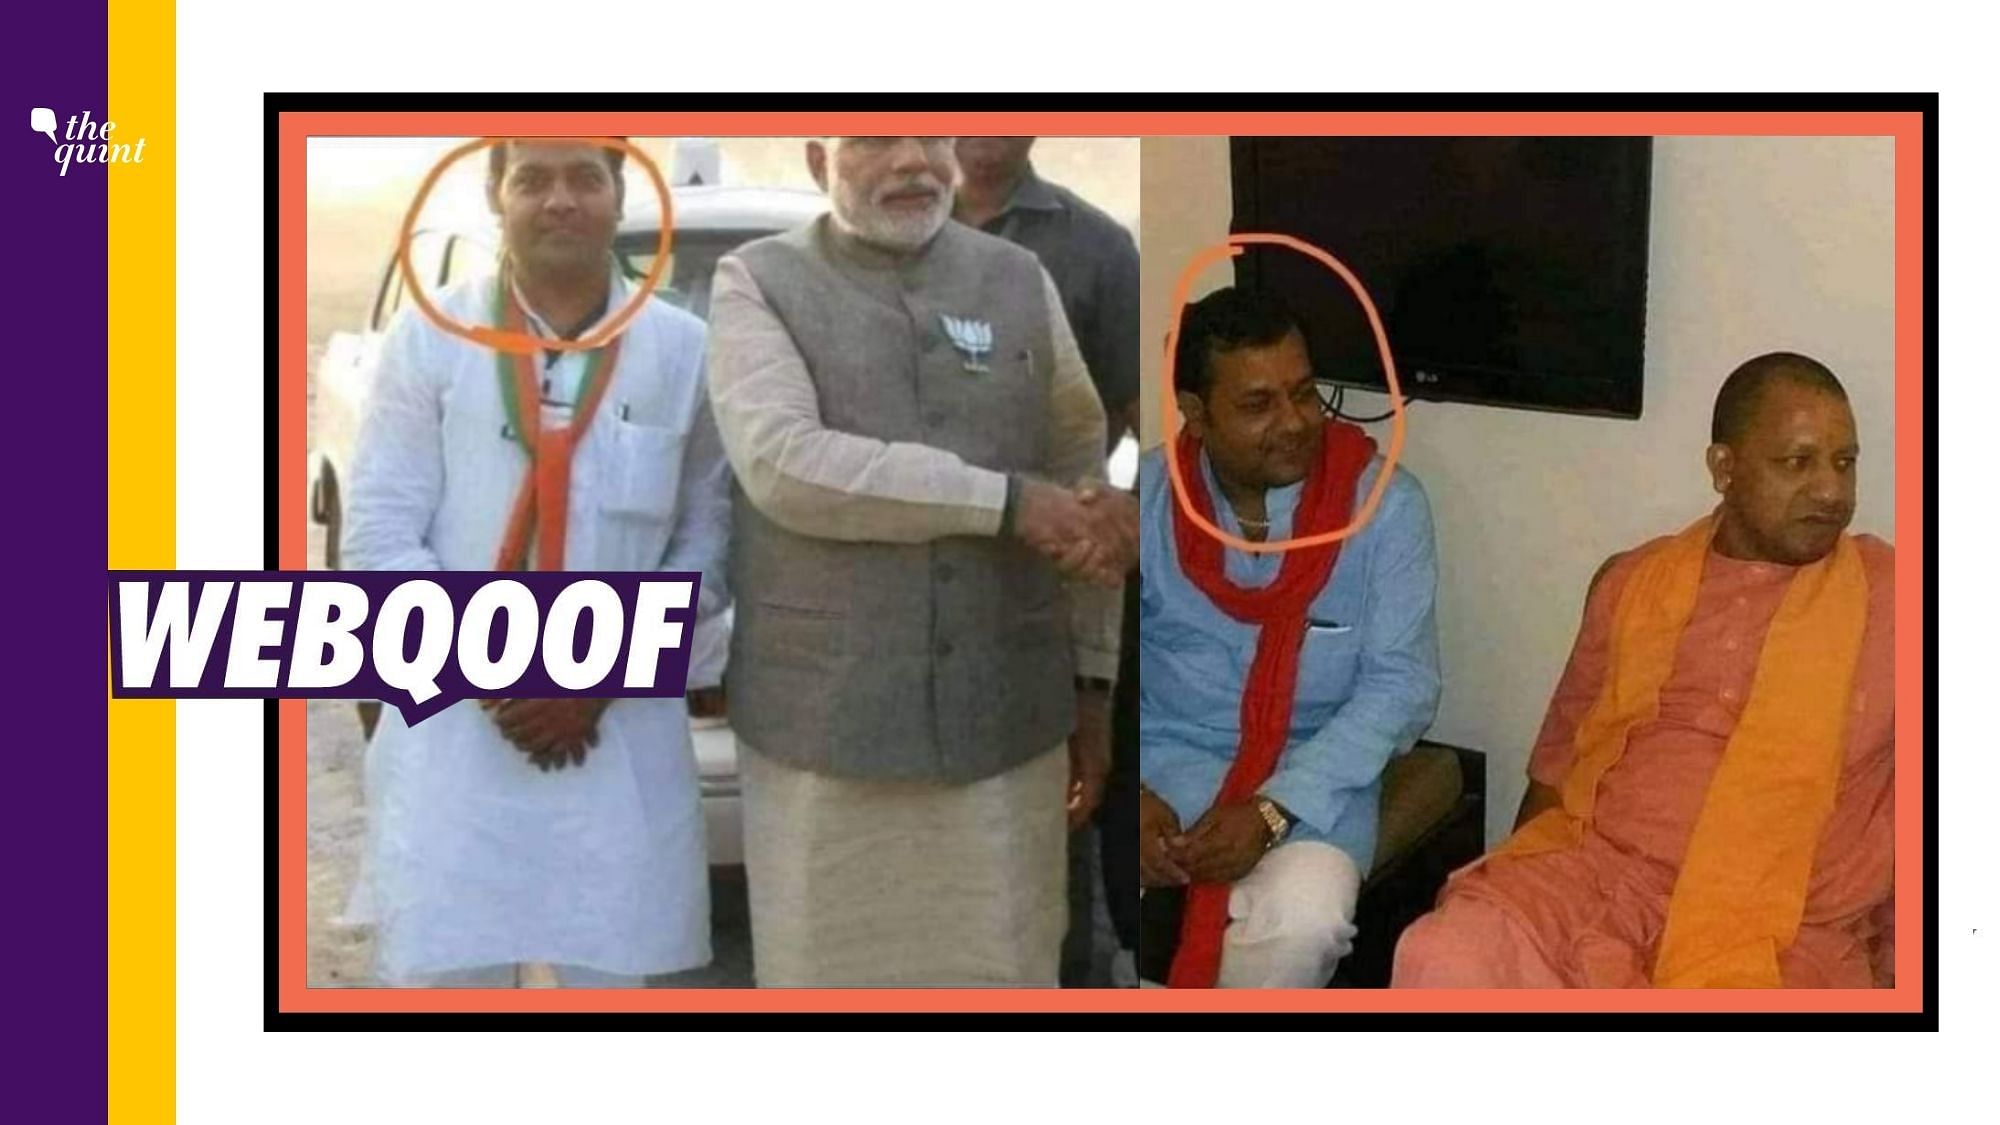 The images of a BJP leader with Yogi Adityanath and PM Narendra Modi are being circulated with the false claim that he is father of Sandeep, who is one of the accused in the Hathras incident.